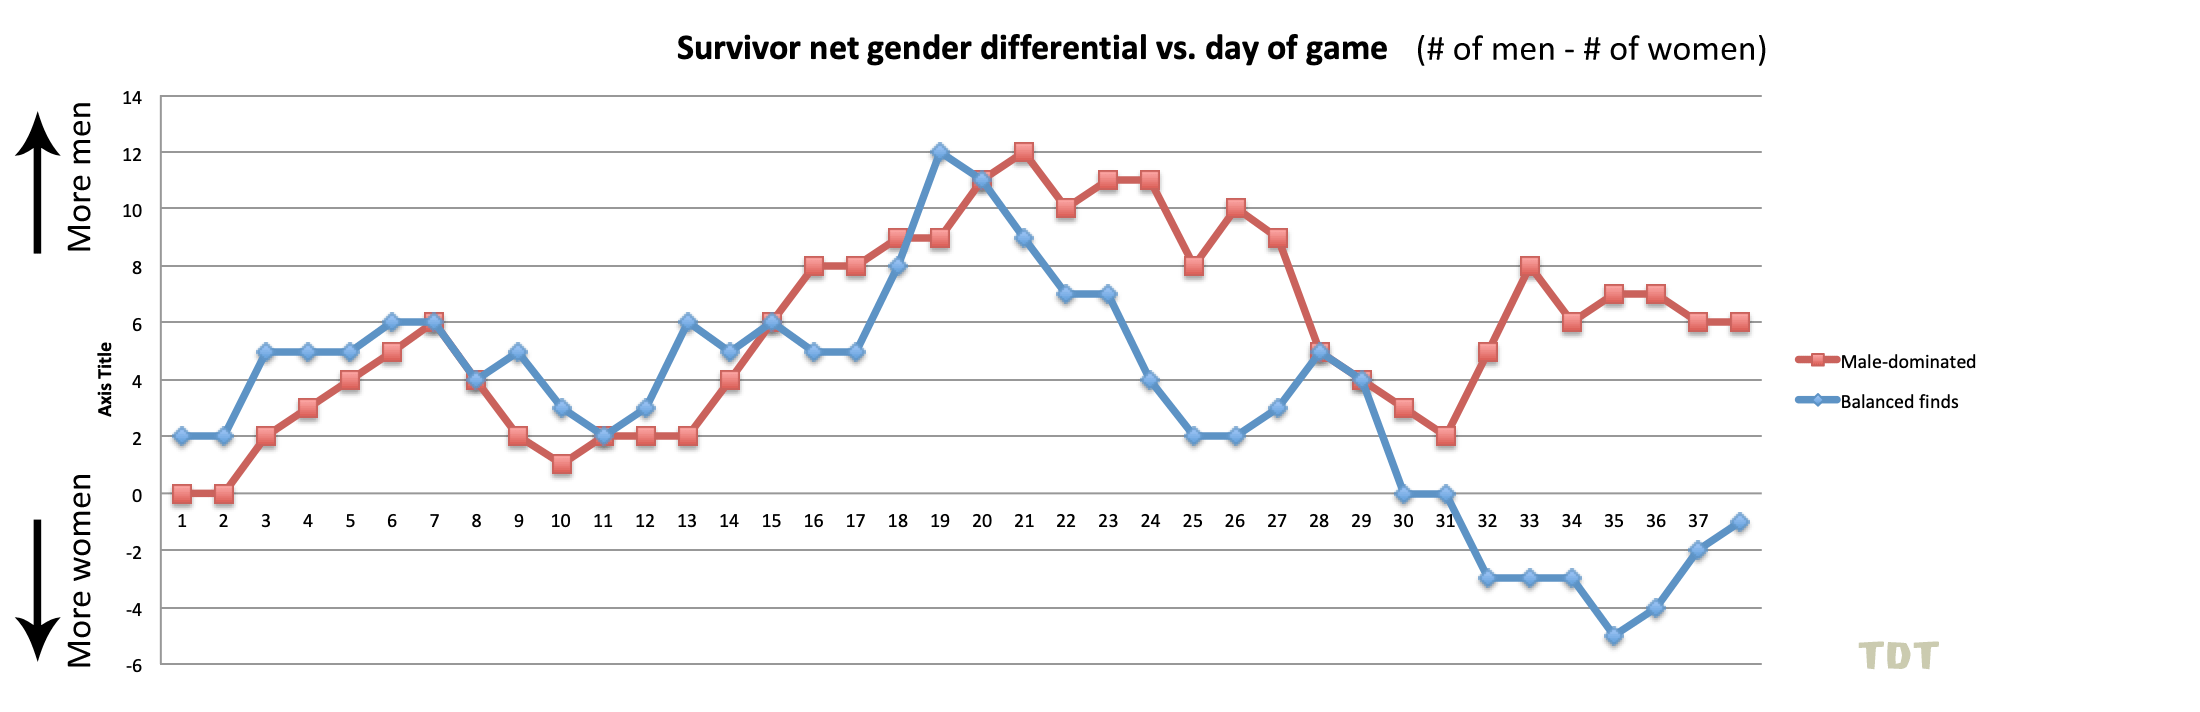 Comparing gender differential of balanced vs. unbalanced seasons, S21-S37